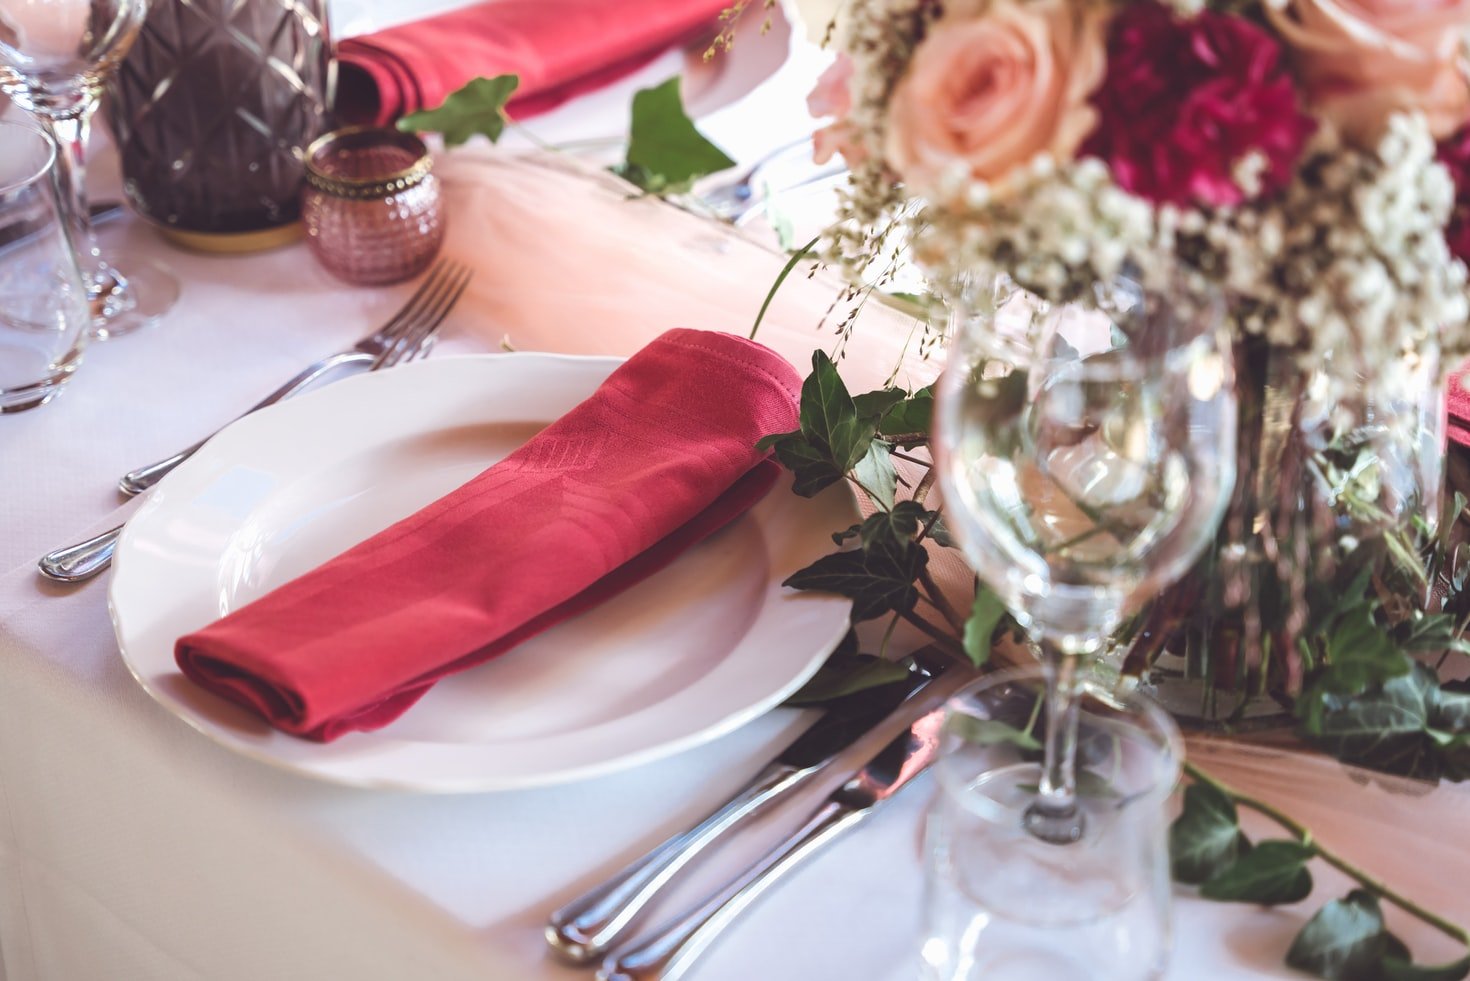 The preparations for a romantic dinner wasn't what Sylvia saw | Source: Unsplash